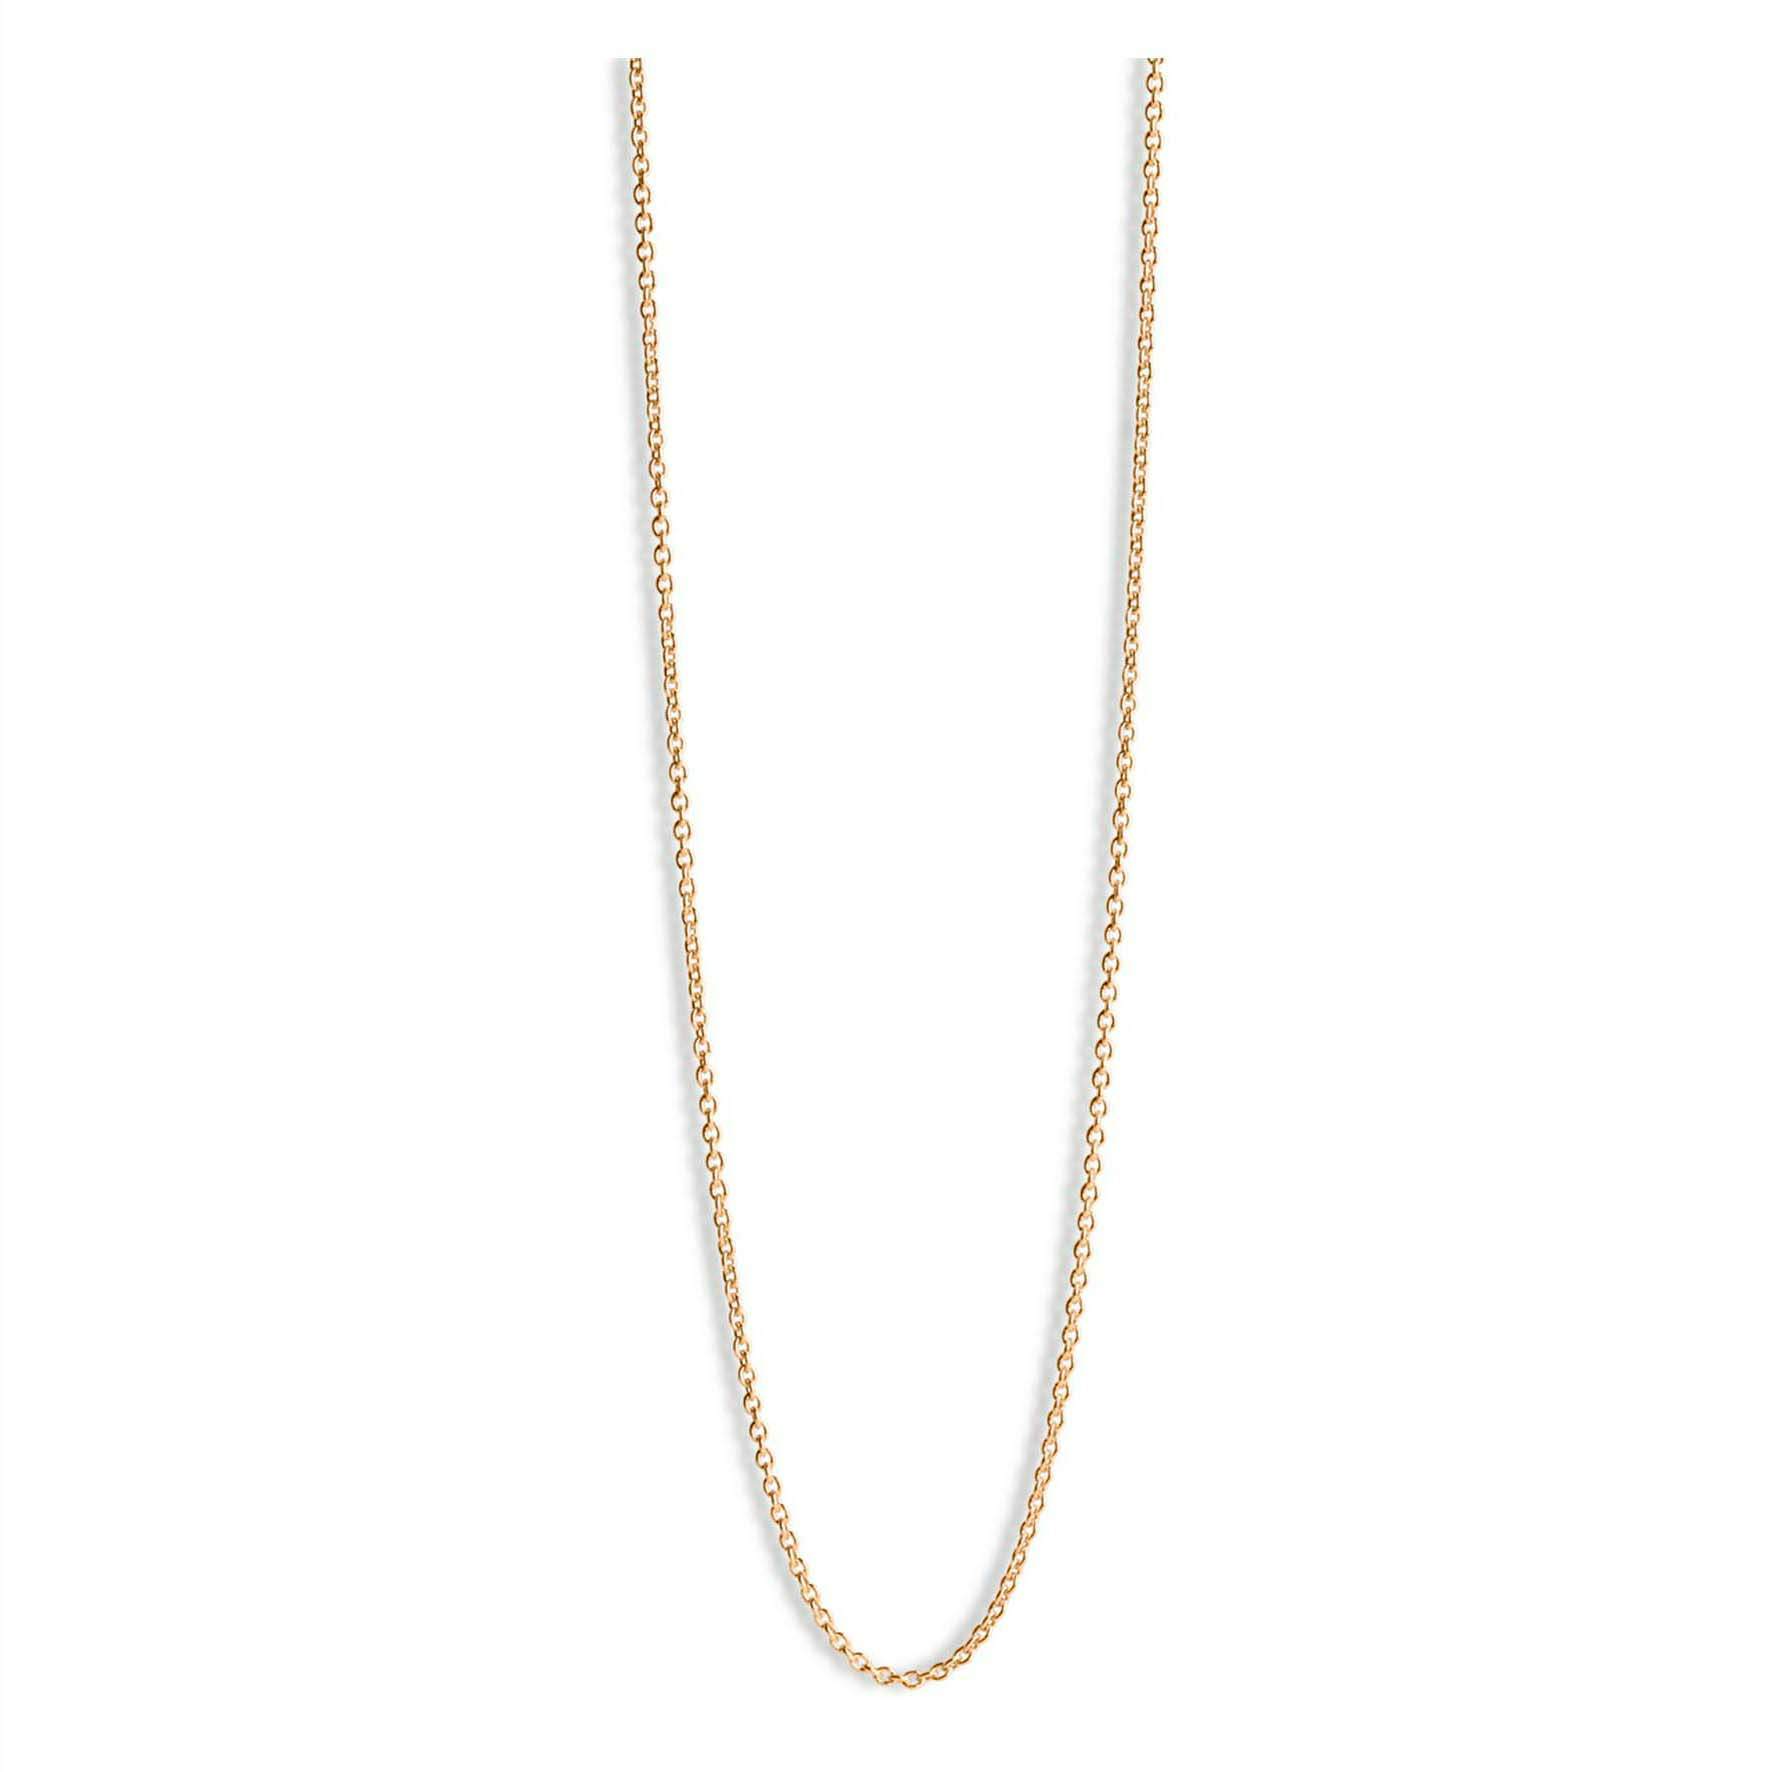 Anchor Chain Necklace from Jane Kønig in Goldplated-Silver Sterling 925|Matt